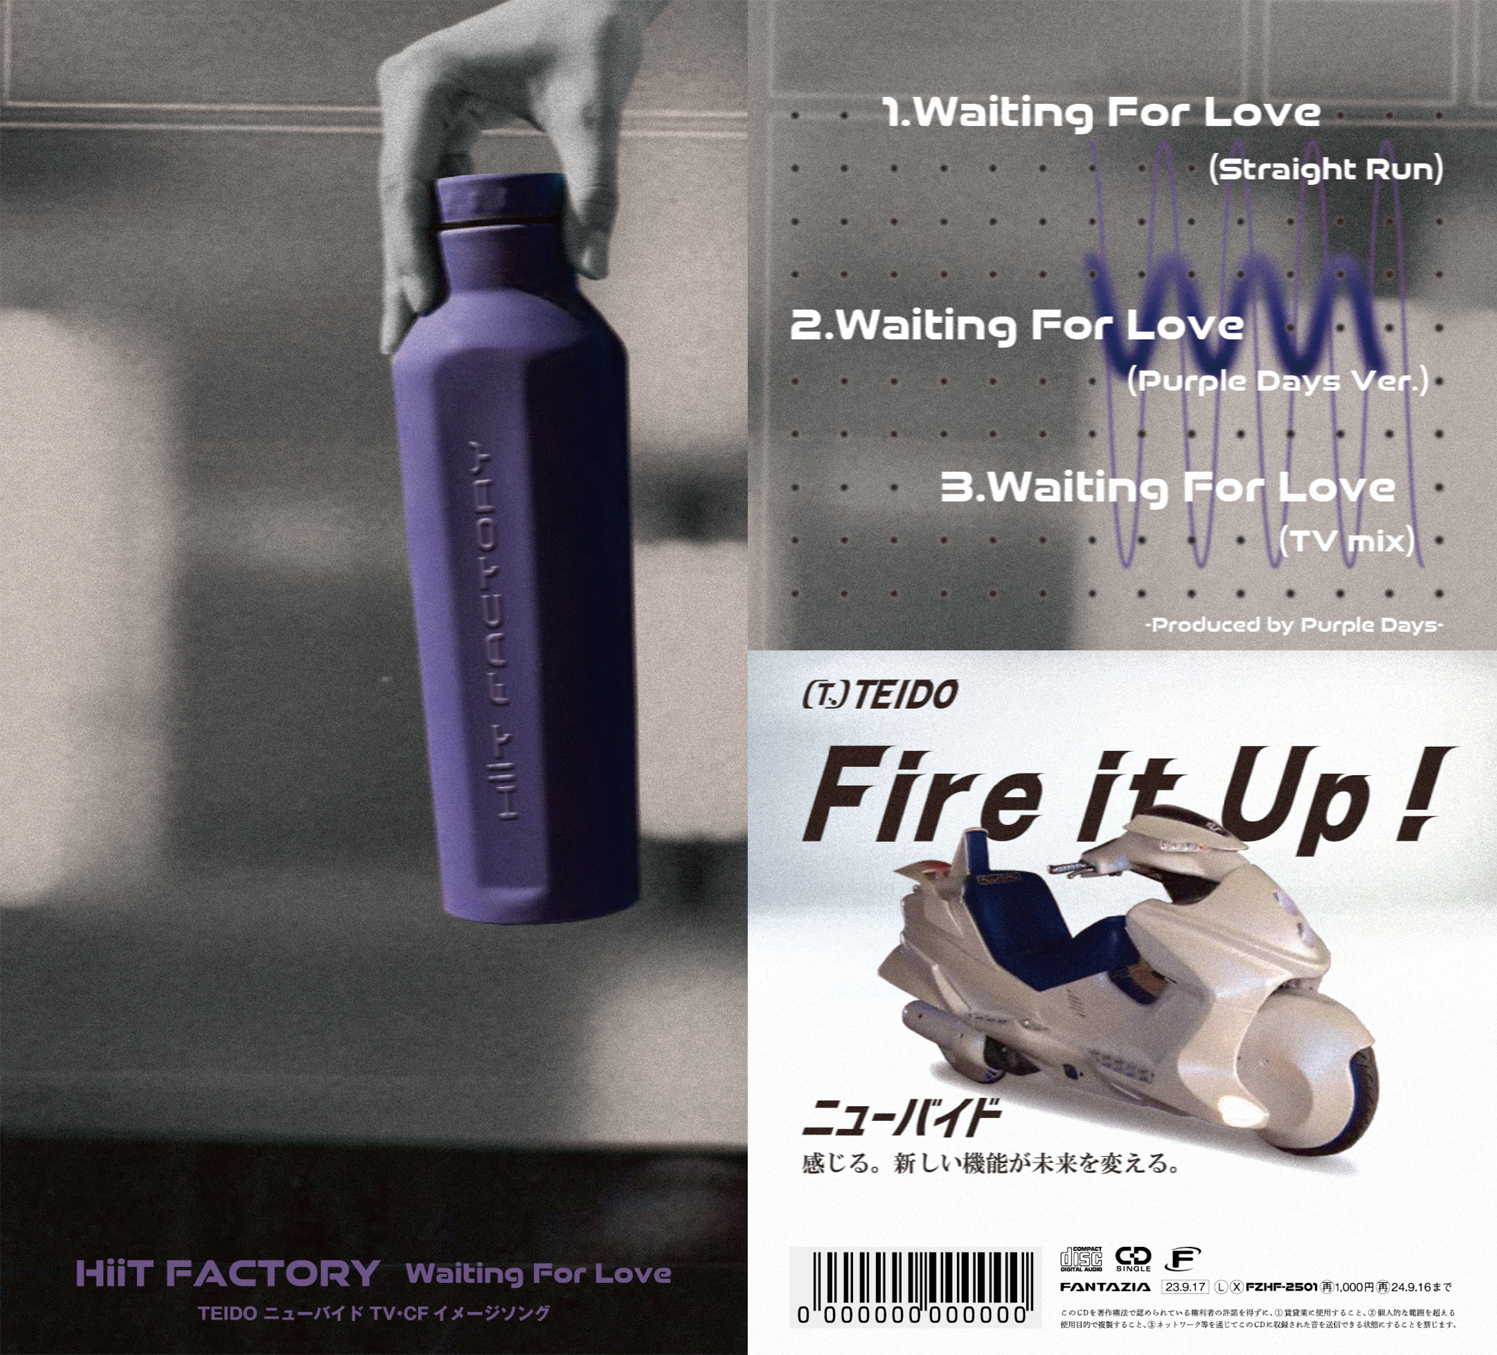 HiiT FACTORY 'Waiting For Love'